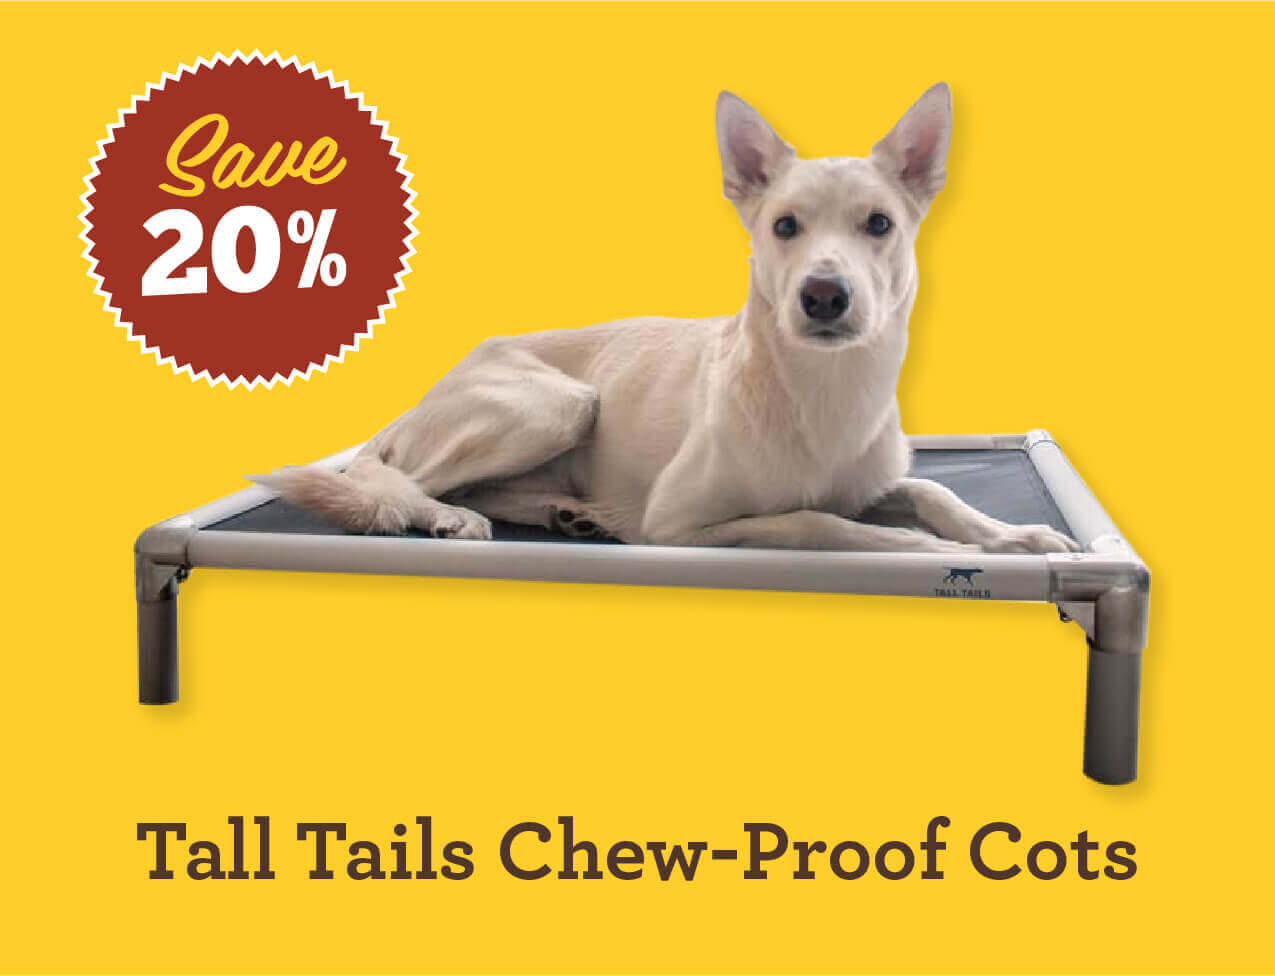 Save 20% on Tall Tails Chew-Proof Cots